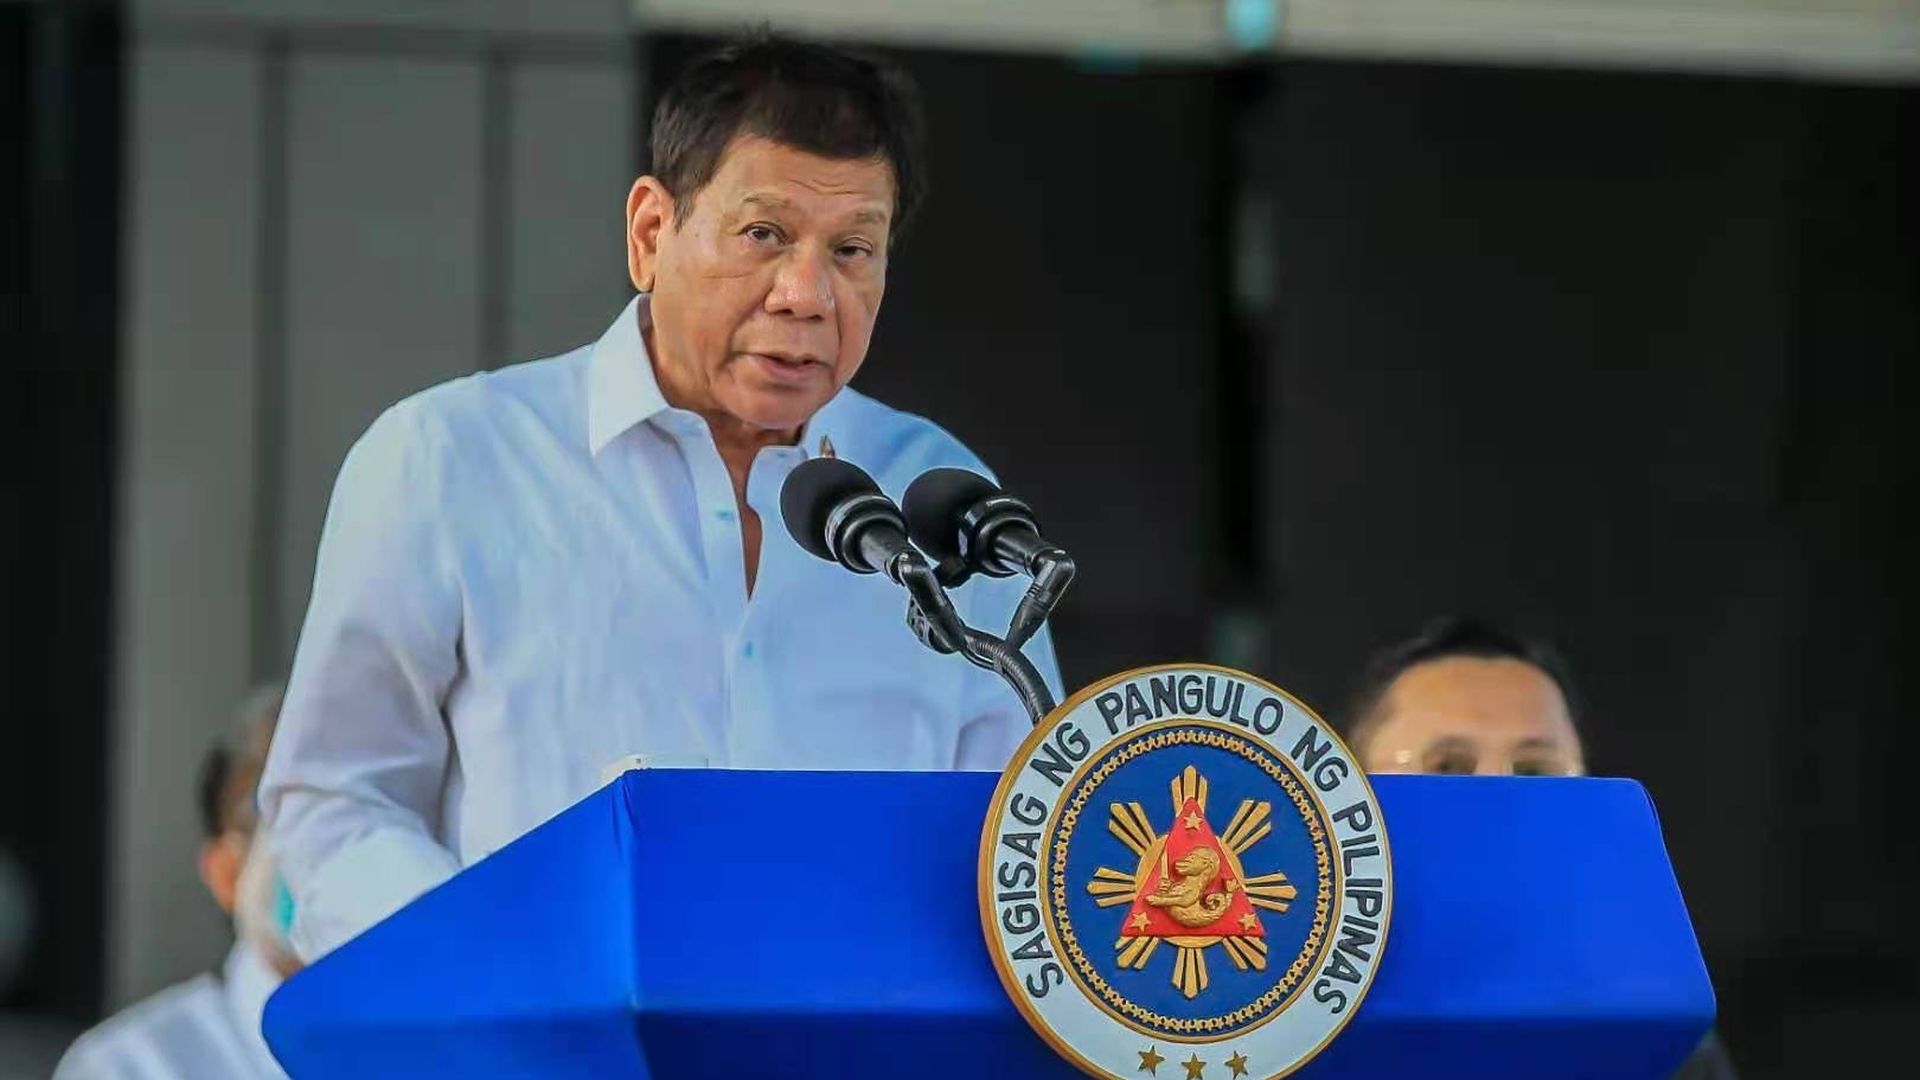 Philippine President Rodrigo Duterte welcomes the arrival of the shipment of the Sinovac vaccine CoronaVac at a Philippine Air Force base in Manila, the Philippines on Feb. 28, 2021. 